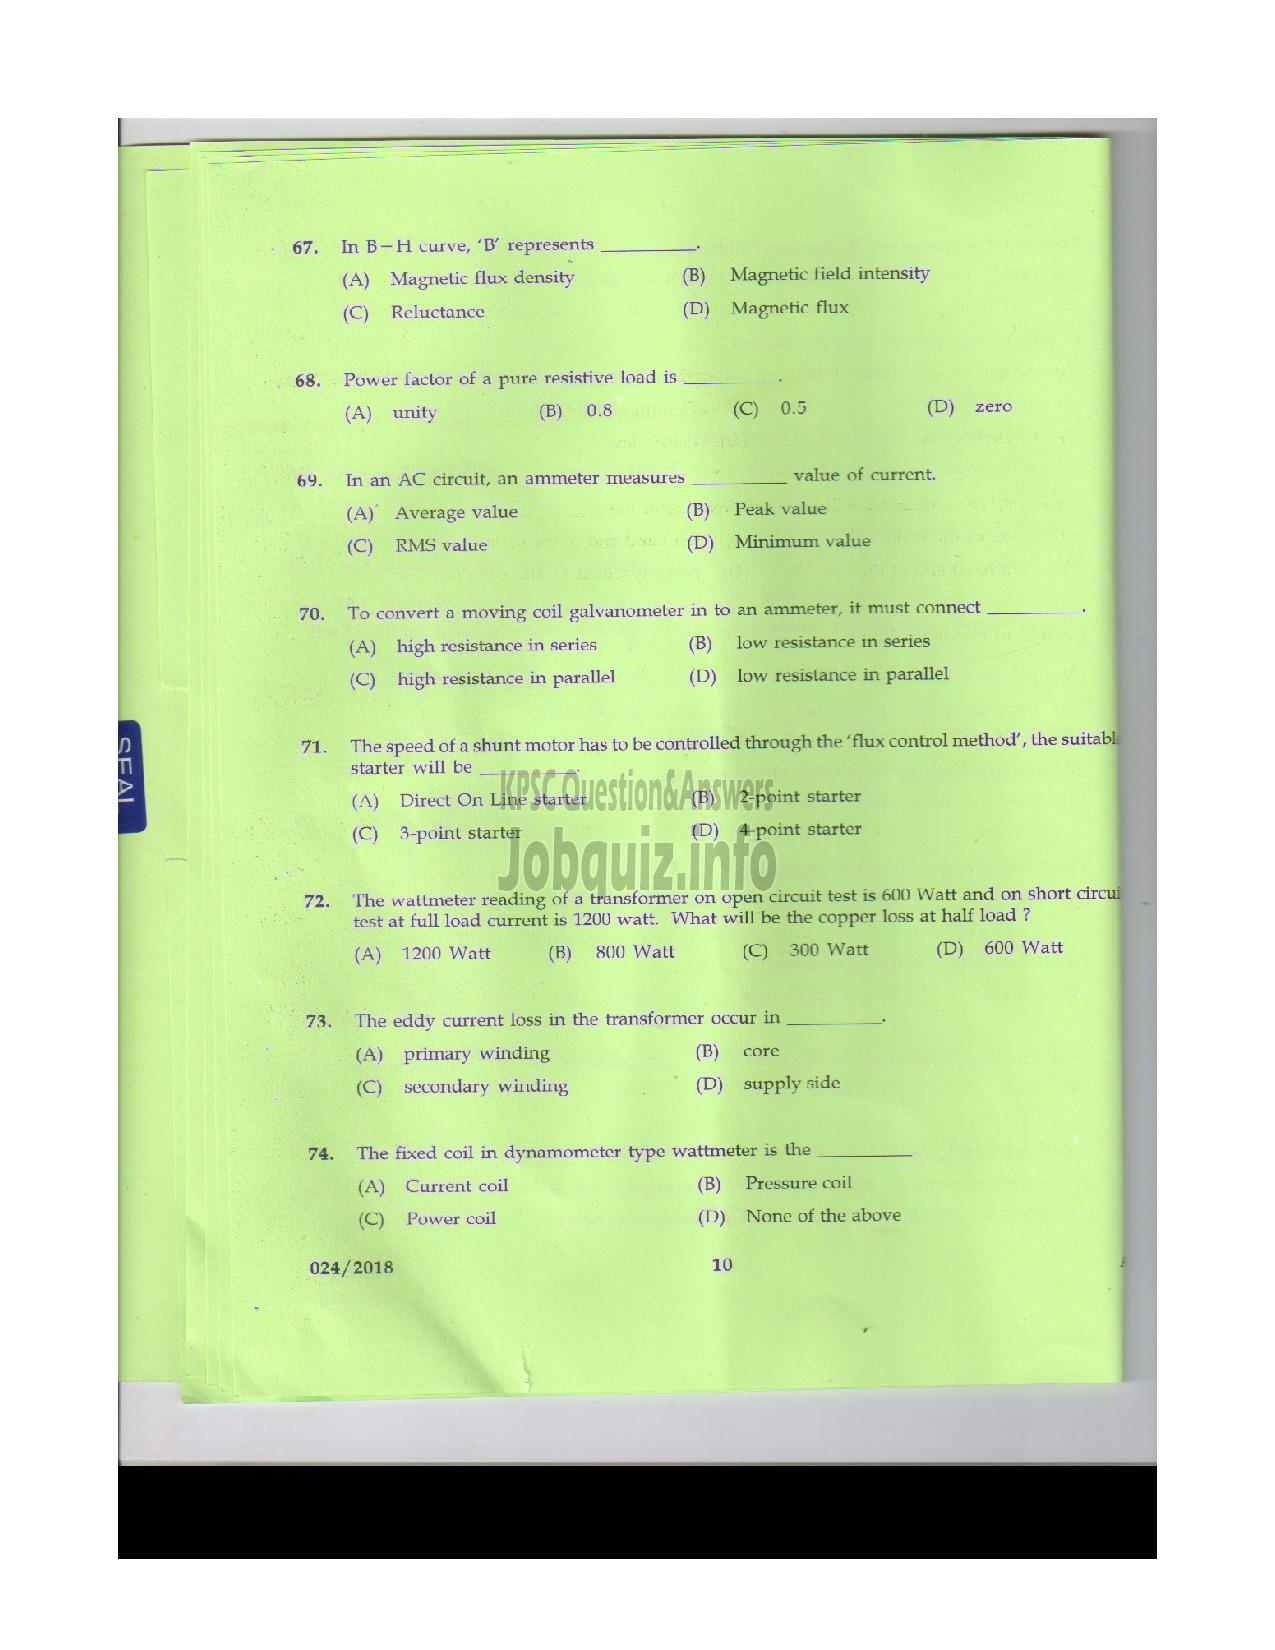 Kerala PSC Question Paper - POLICE CONSTABLE TELECOMMUNICATIONS POLICE-9